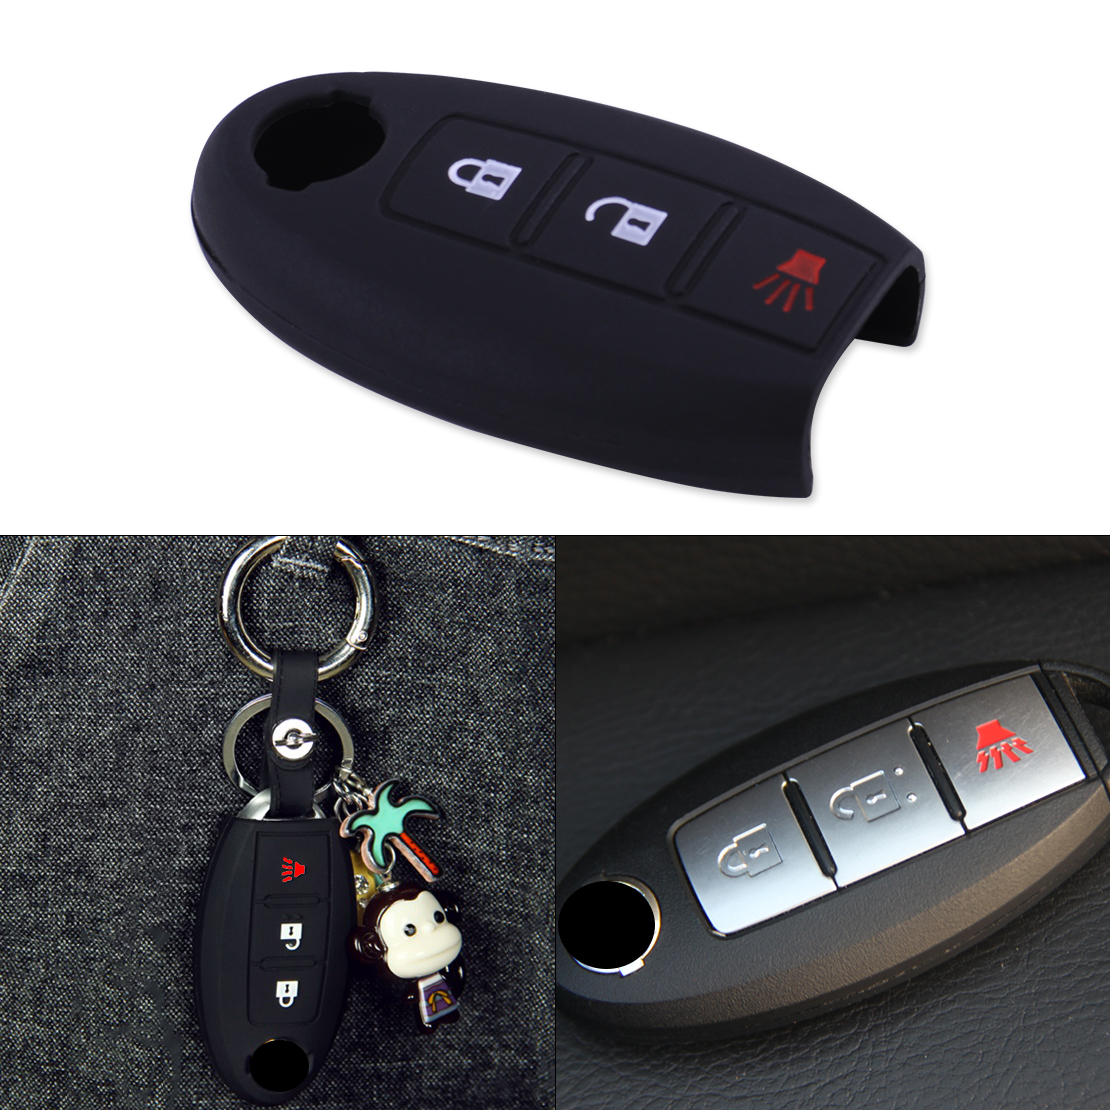 Red 3BTN Remote Key Fob Case Shell Silicone Cover For Nissan Juke Murano Leaf